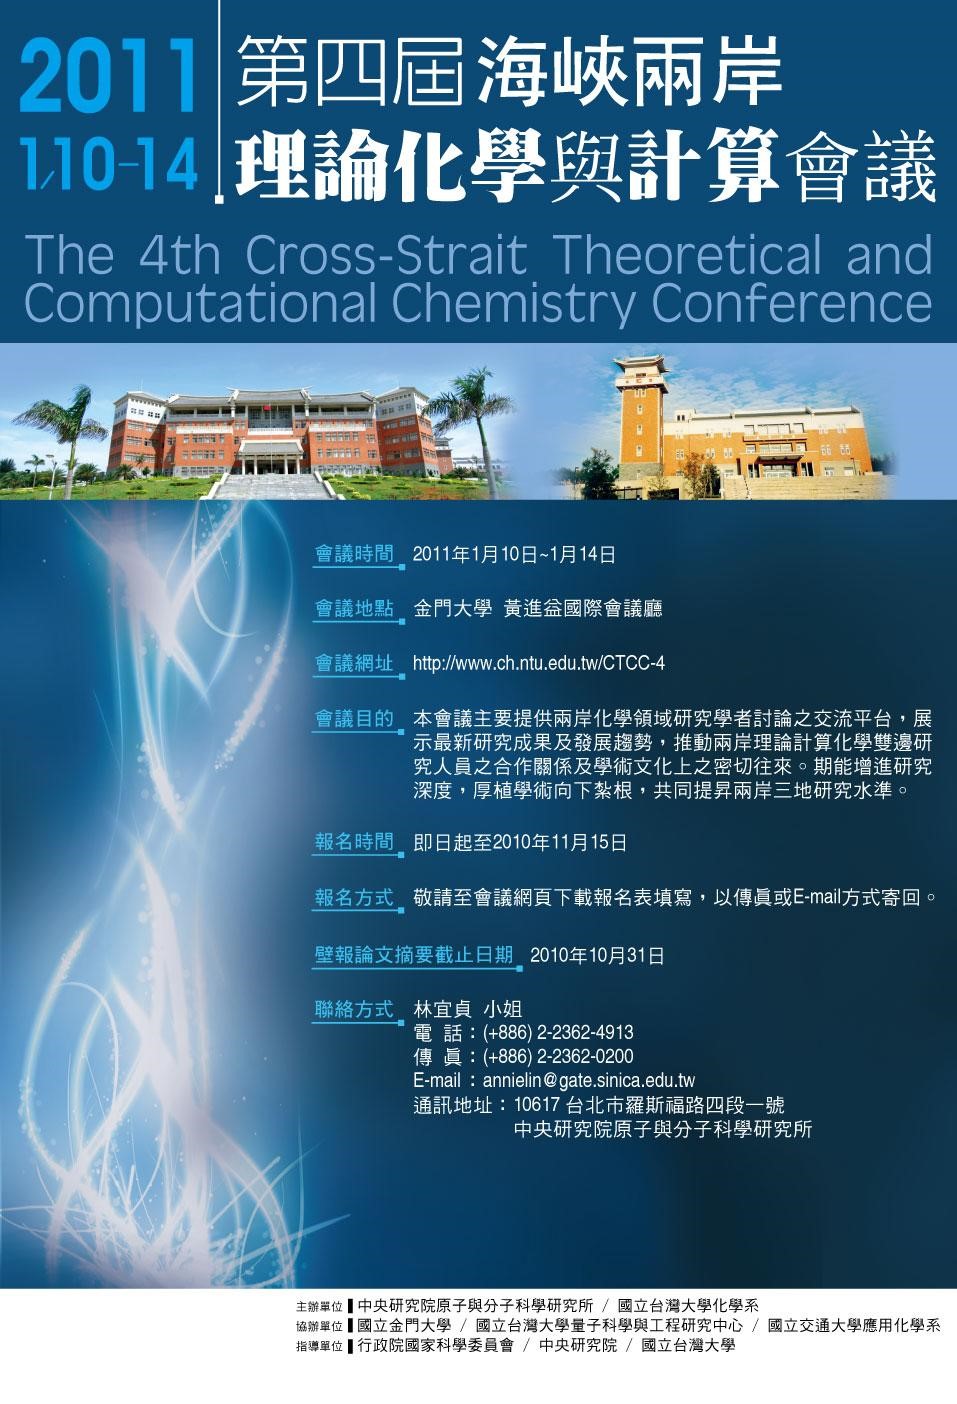 The 4th Cross-Strait Theoretical and Computational Chemistry Conference